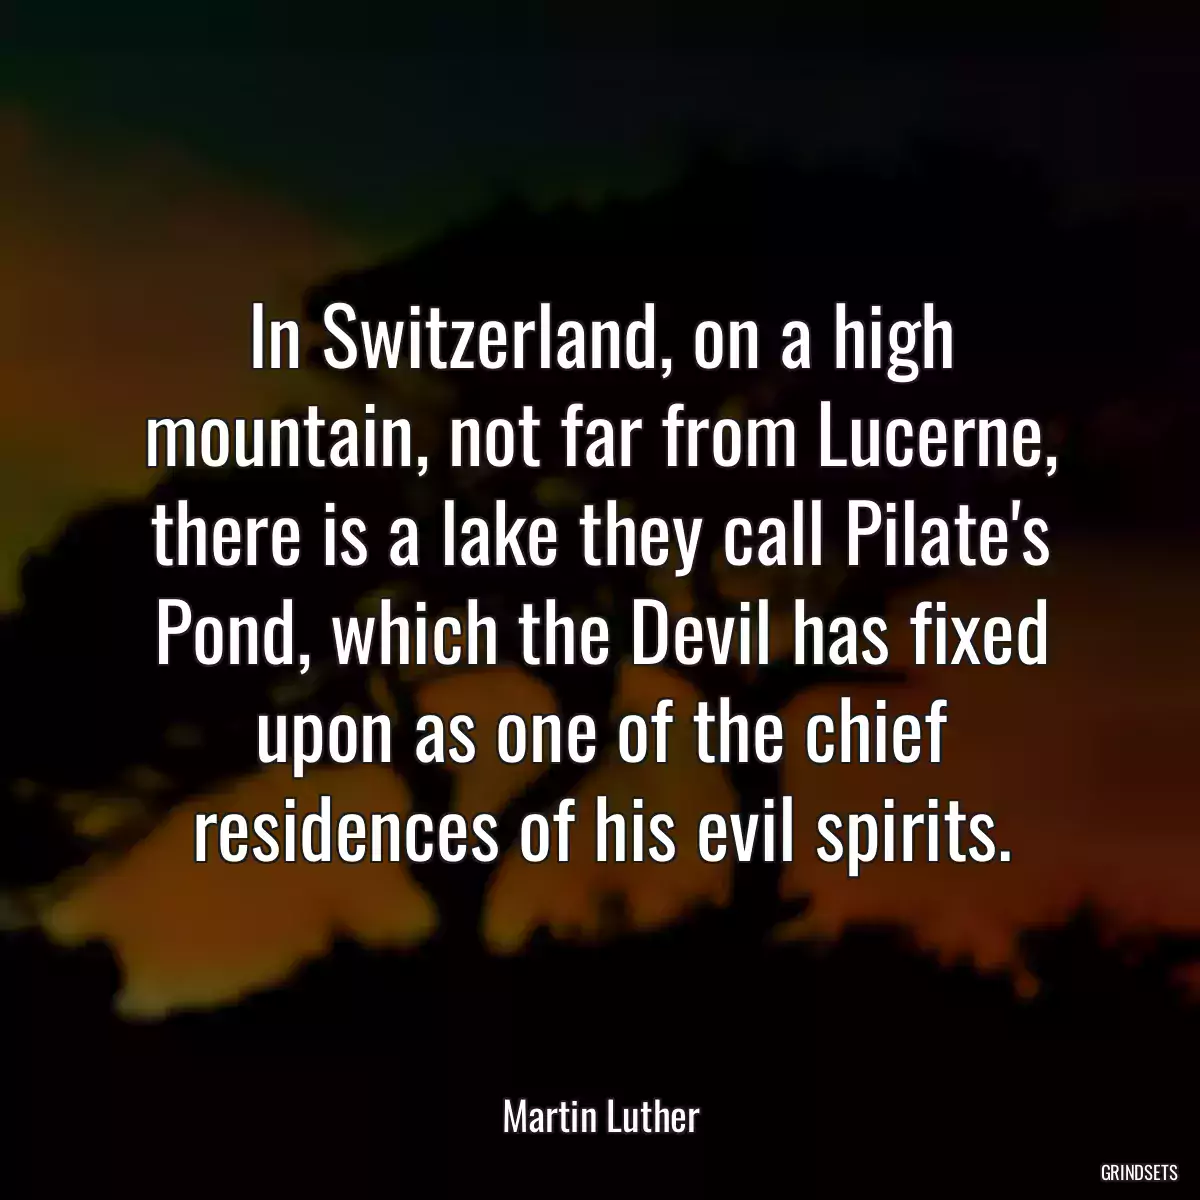 In Switzerland, on a high mountain, not far from Lucerne, there is a lake they call Pilate\'s Pond, which the Devil has fixed upon as one of the chief residences of his evil spirits.